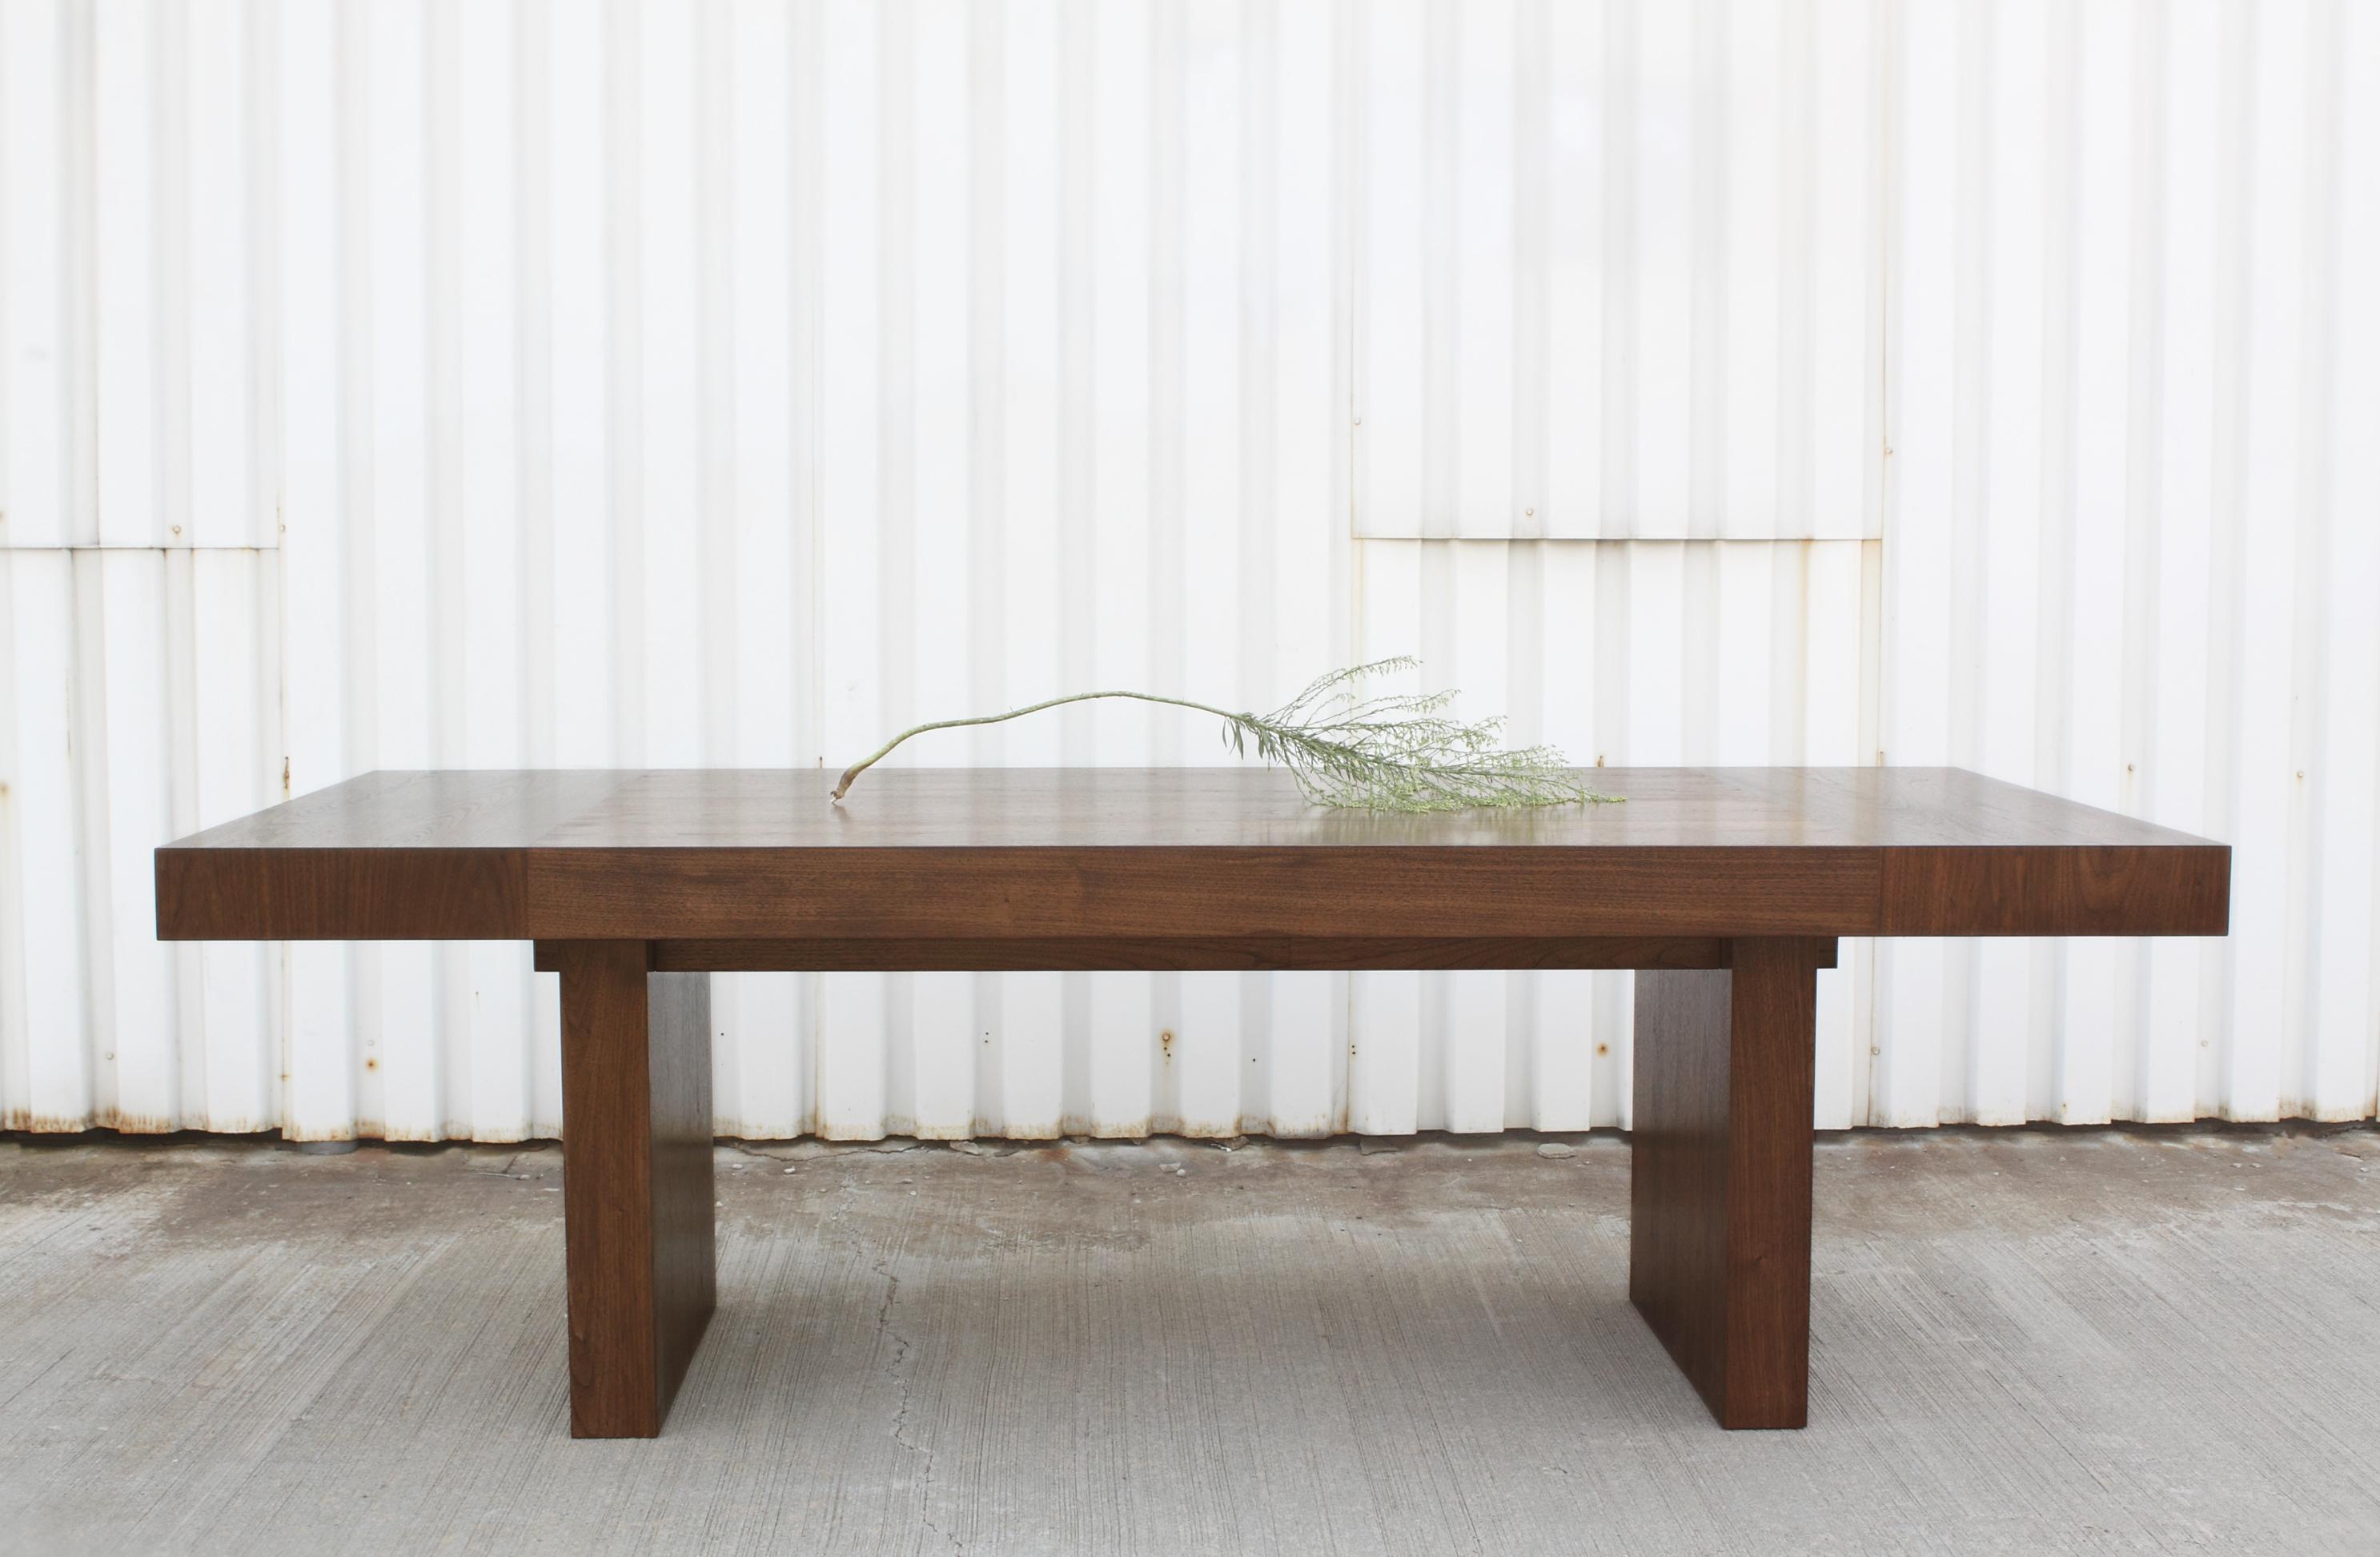 Item: T dining table
By: May Furniture
Dimensions: 86” L x 42” W x 30” H
Material/ Finish: Oiled walnut
Customizable / 9 traditional wood finish options
Made in/ships from: Brooklyn, Ny 11222
Made to order/ 8-10 week lead time.
 